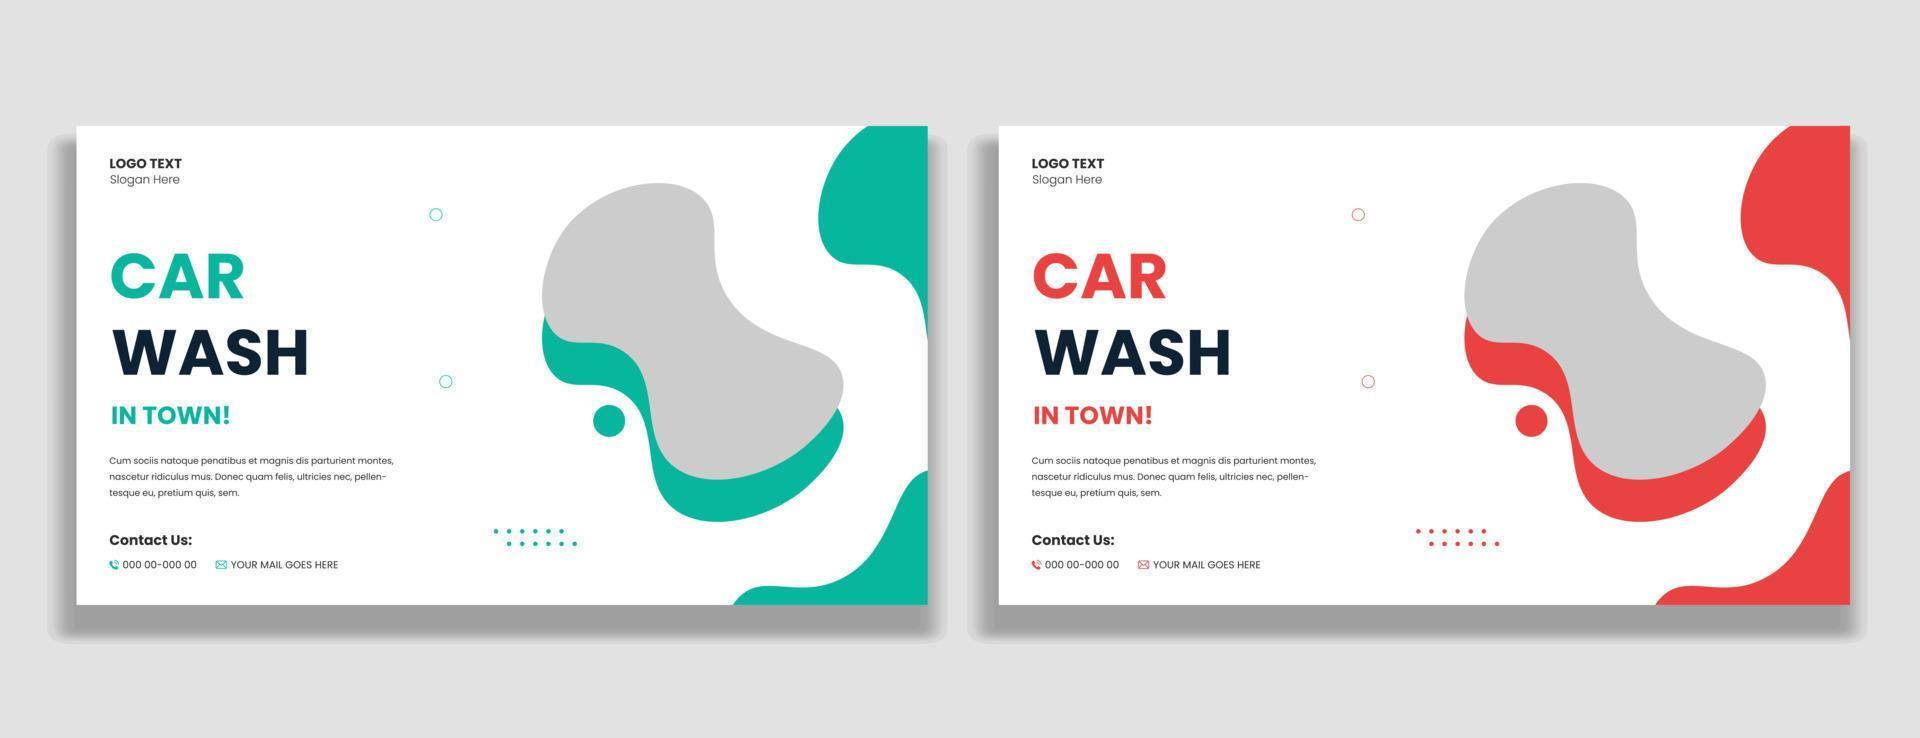 Car Wash Thumbnail Cover And Web Banner Template vector